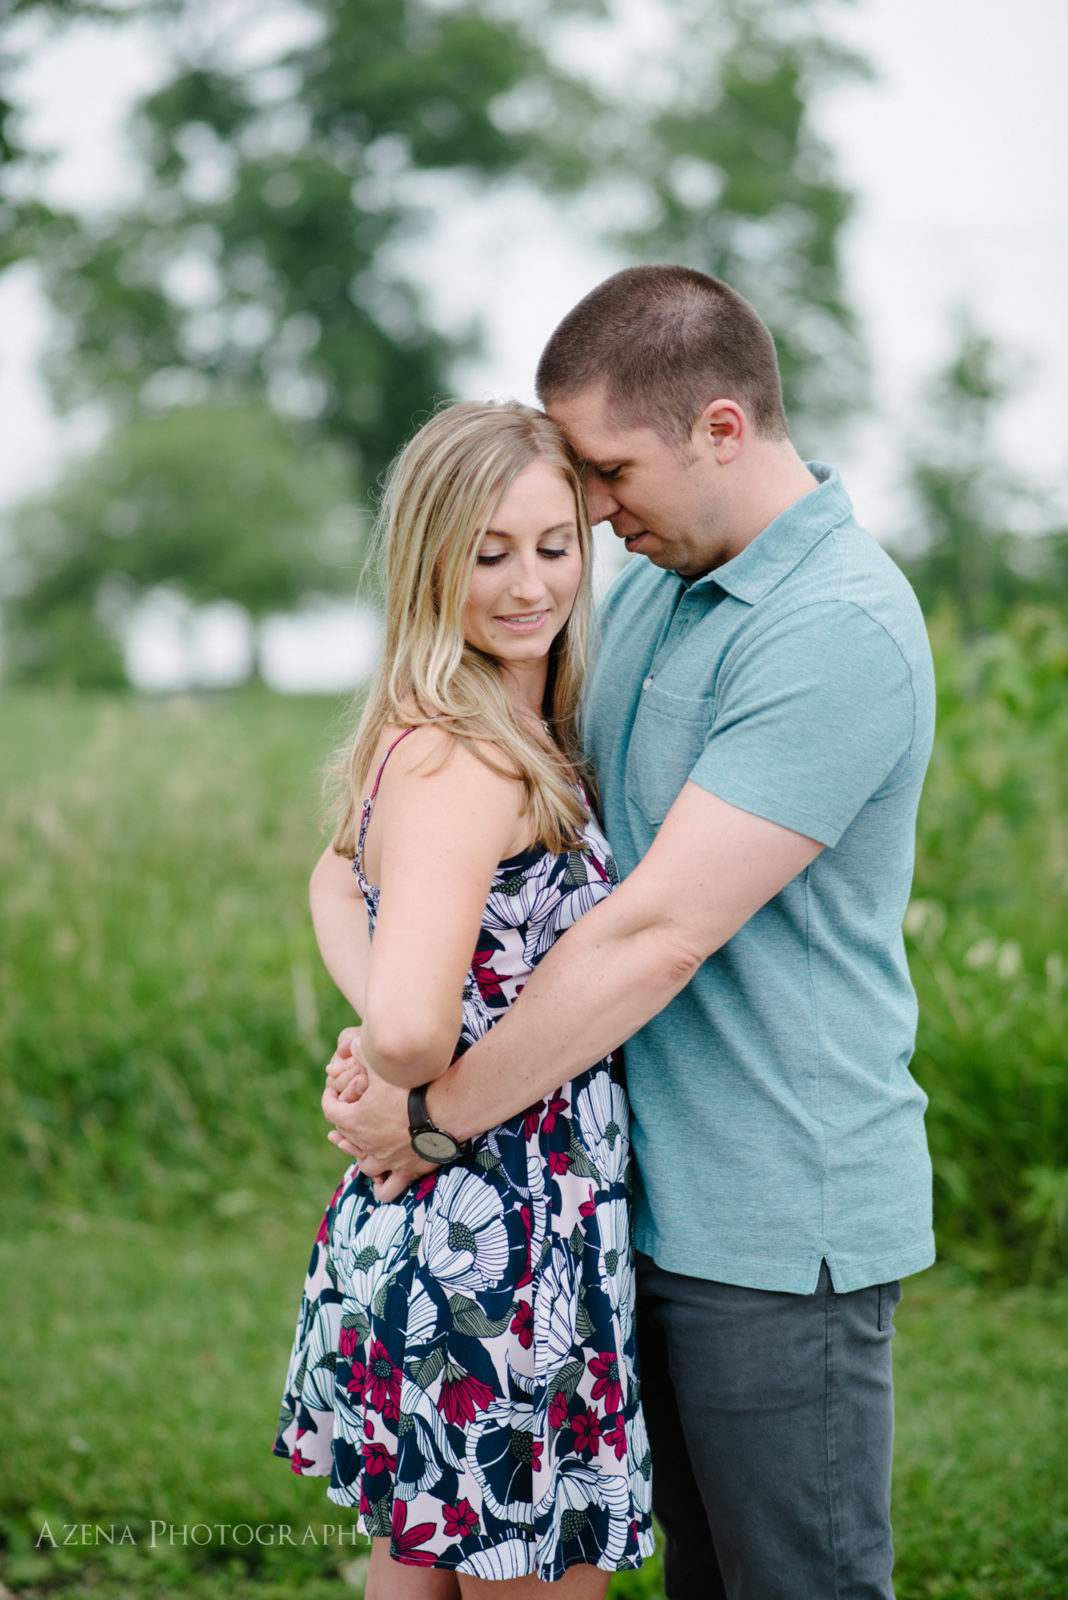 romantic moment during engagement session at Olin Park in Madison, WI